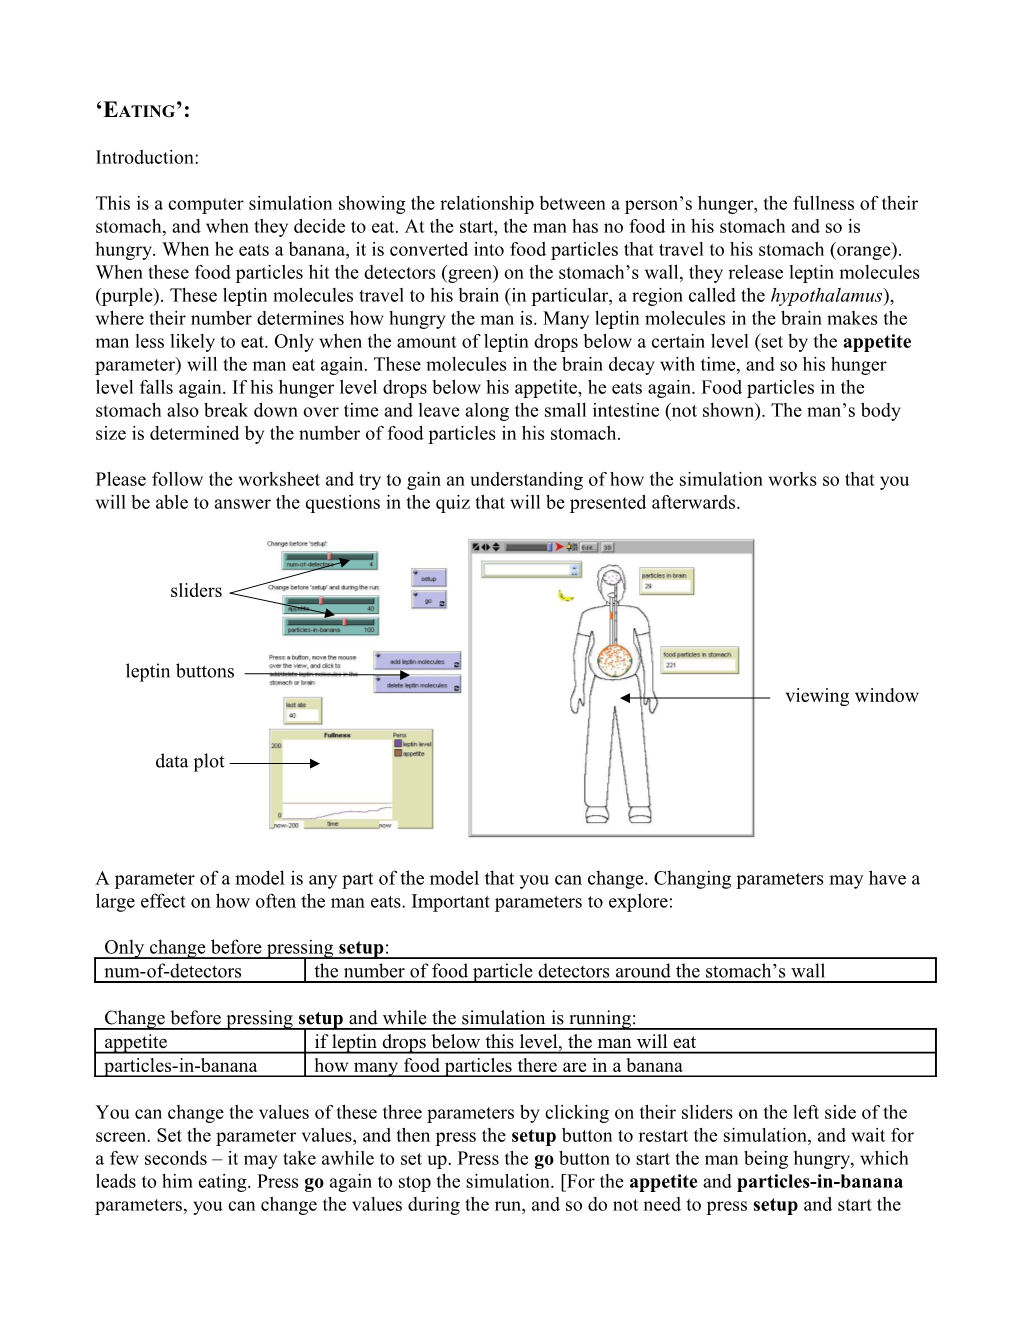 Please Follow the Worksheet and Try to Gain an Understanding of How the Simulation Works